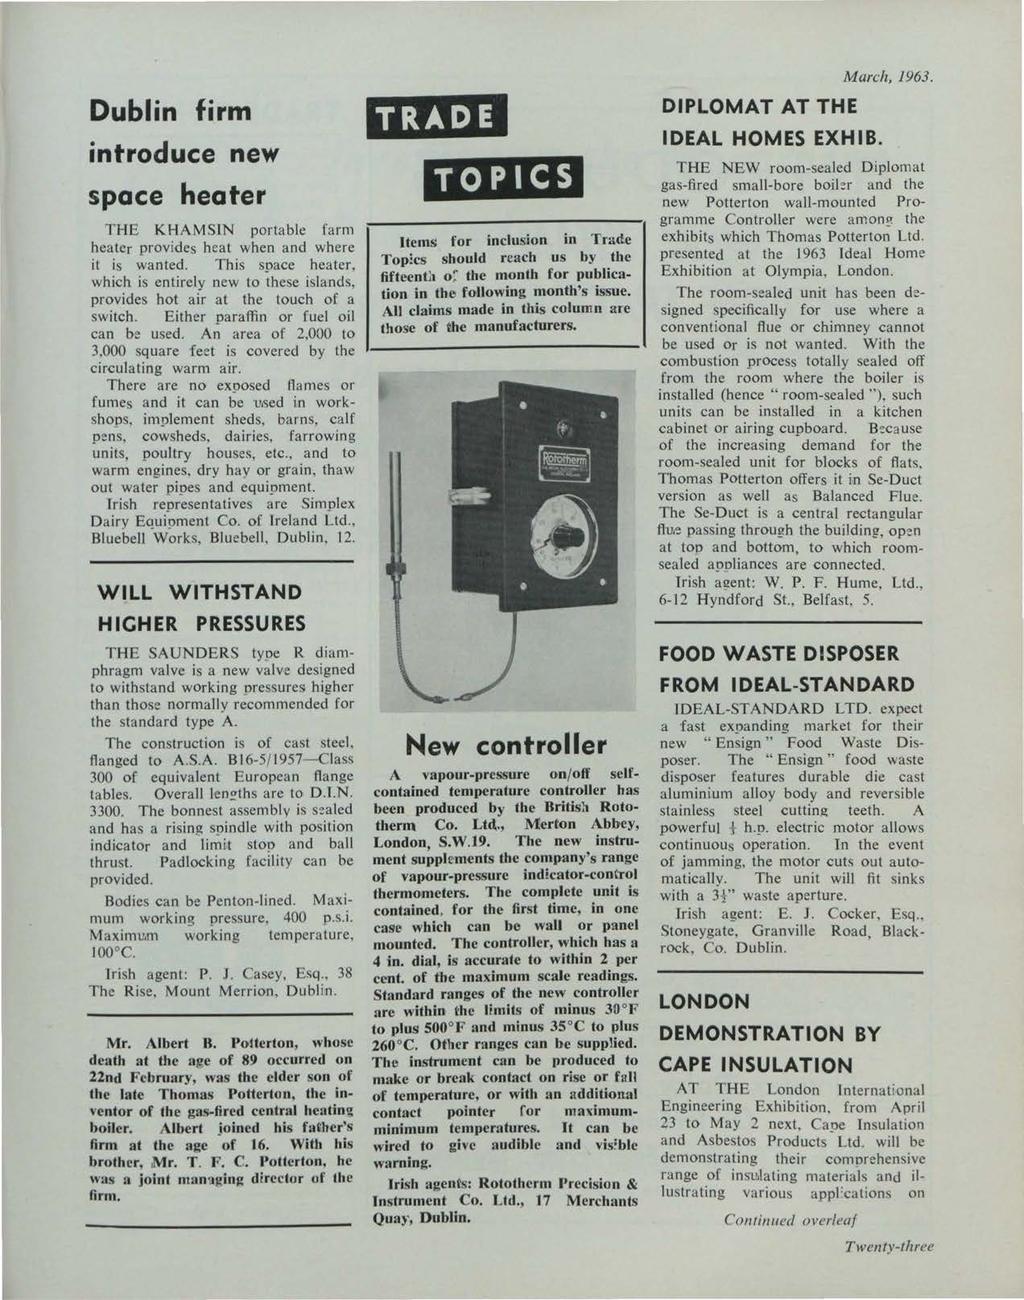 et al.: The Irish Plumber and Heating Contractor, March 1963 (complete is Dublin firm introduce new space heater THE KHAMSIN portable farm heater provides heat when and where it is wanted.